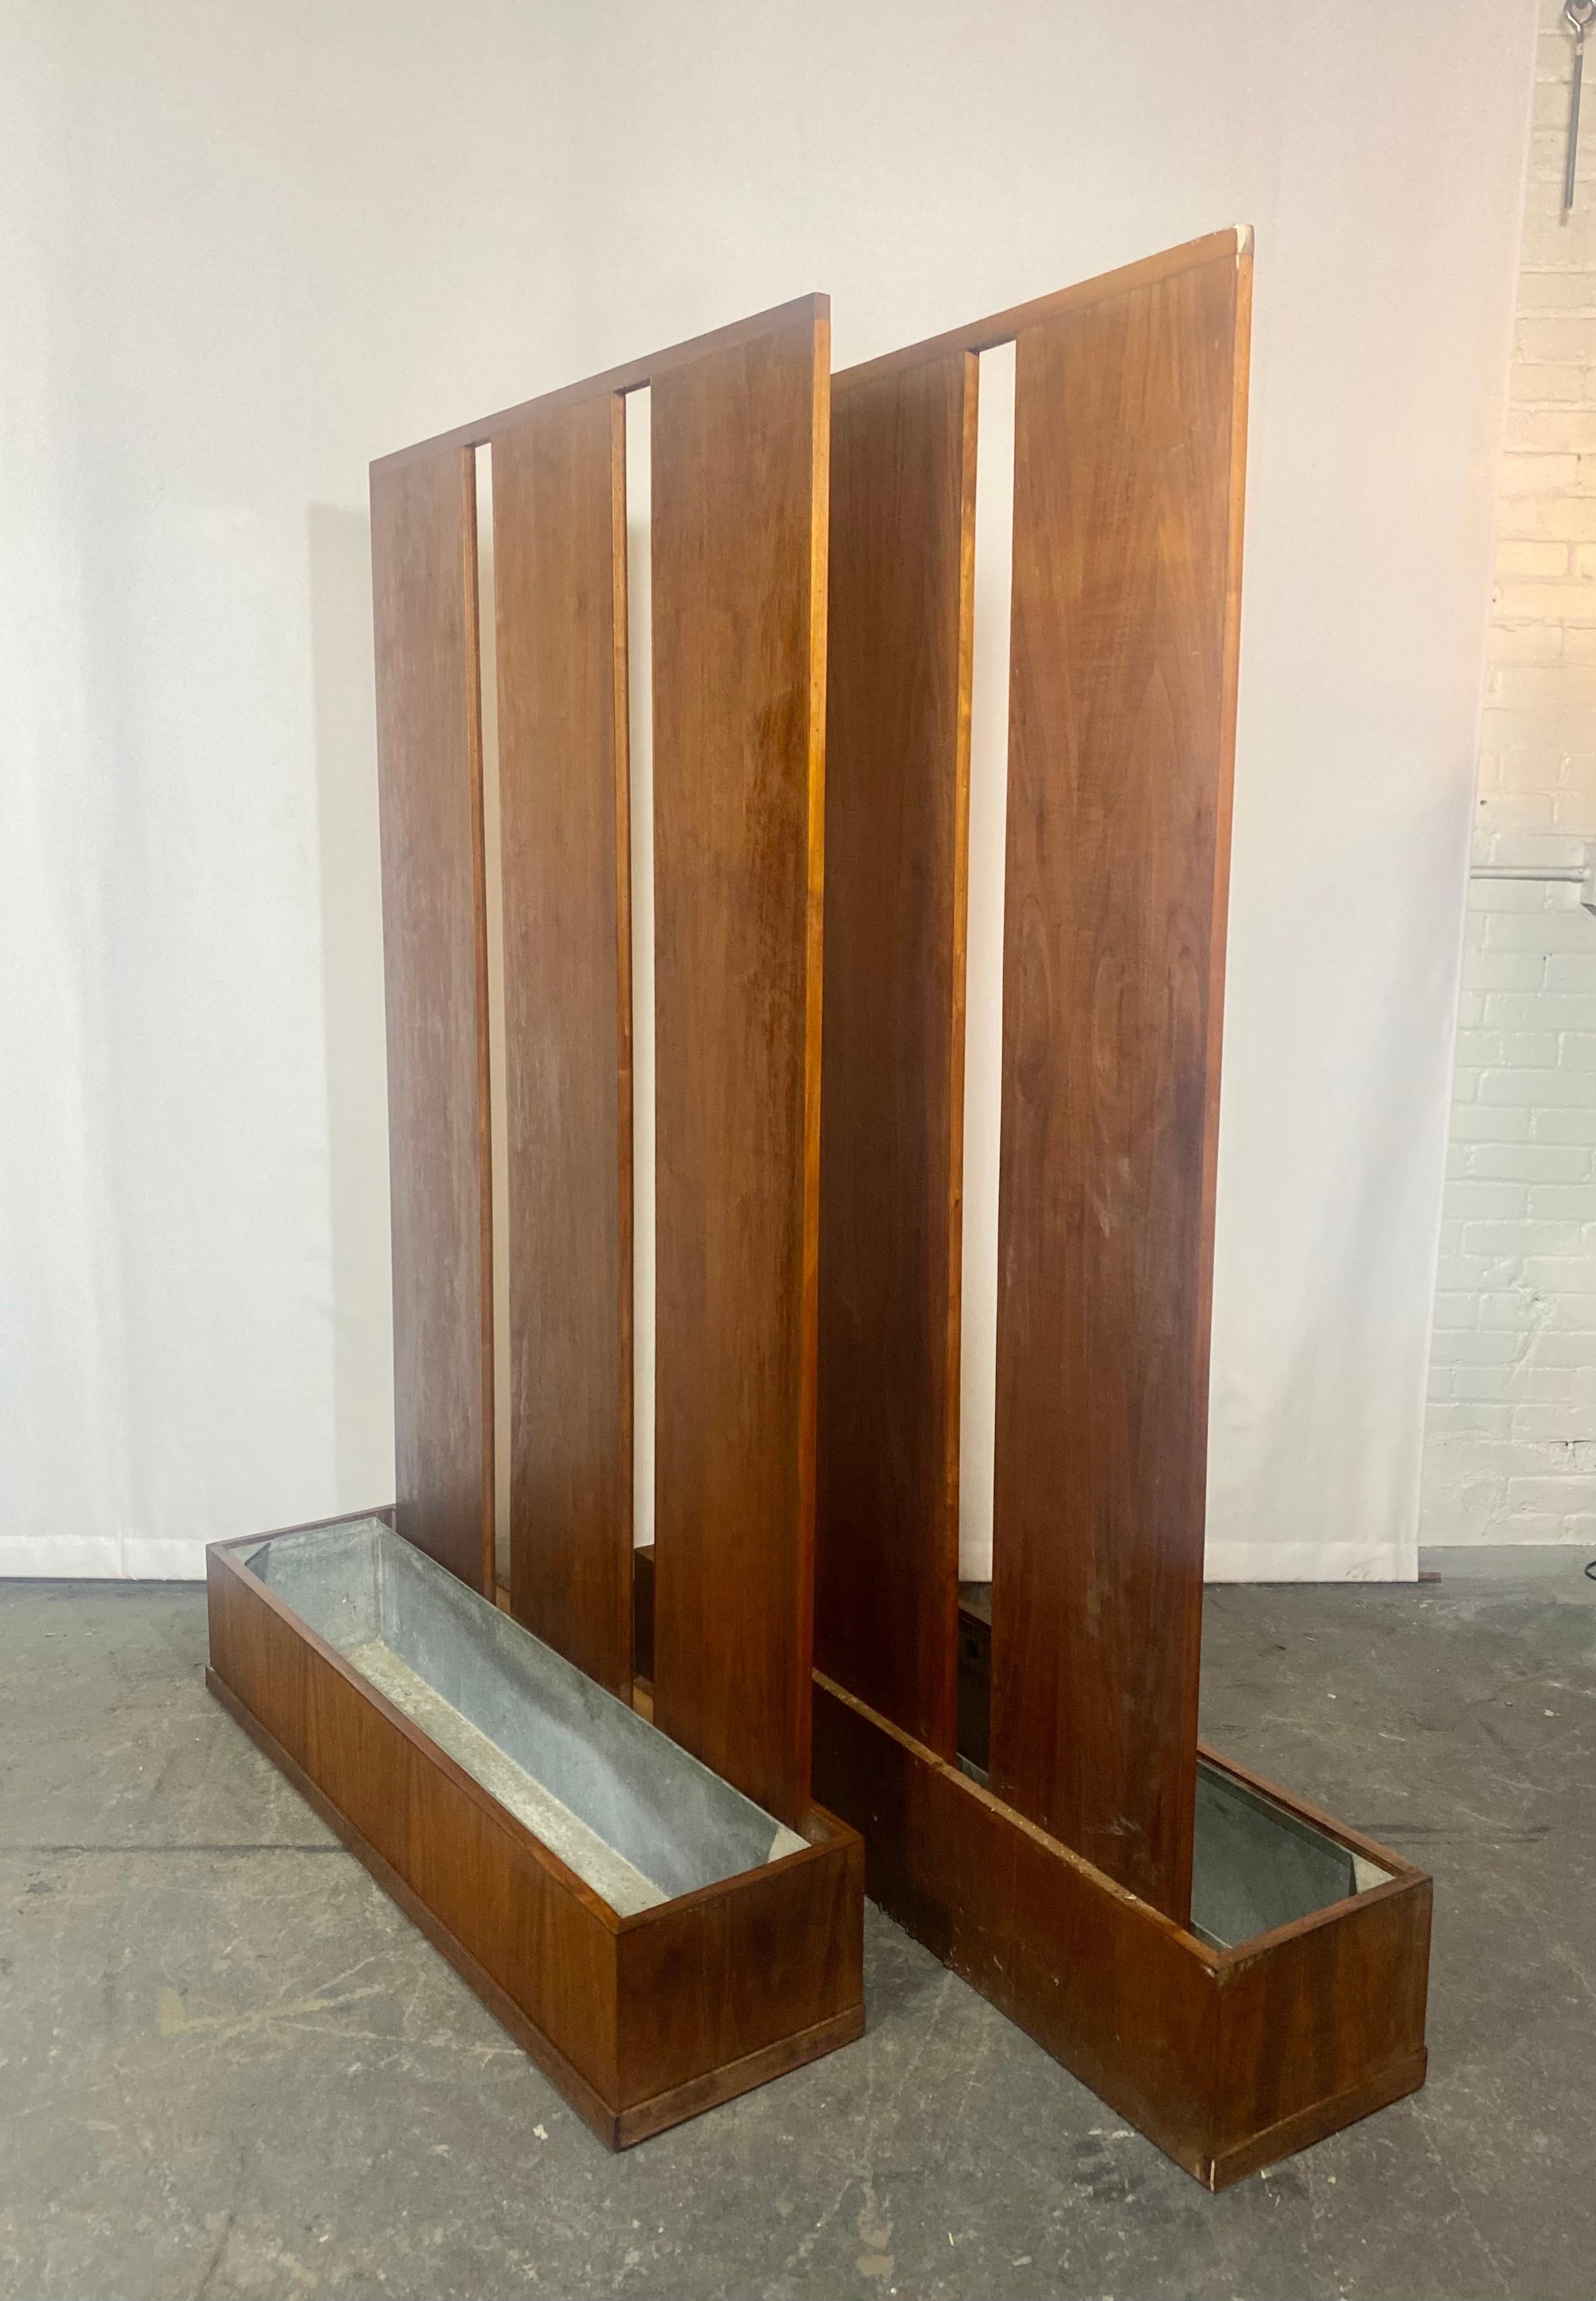 Classic Mid Century Modern Architectural Room Divider's with planter boxes In Good Condition For Sale In Buffalo, NY